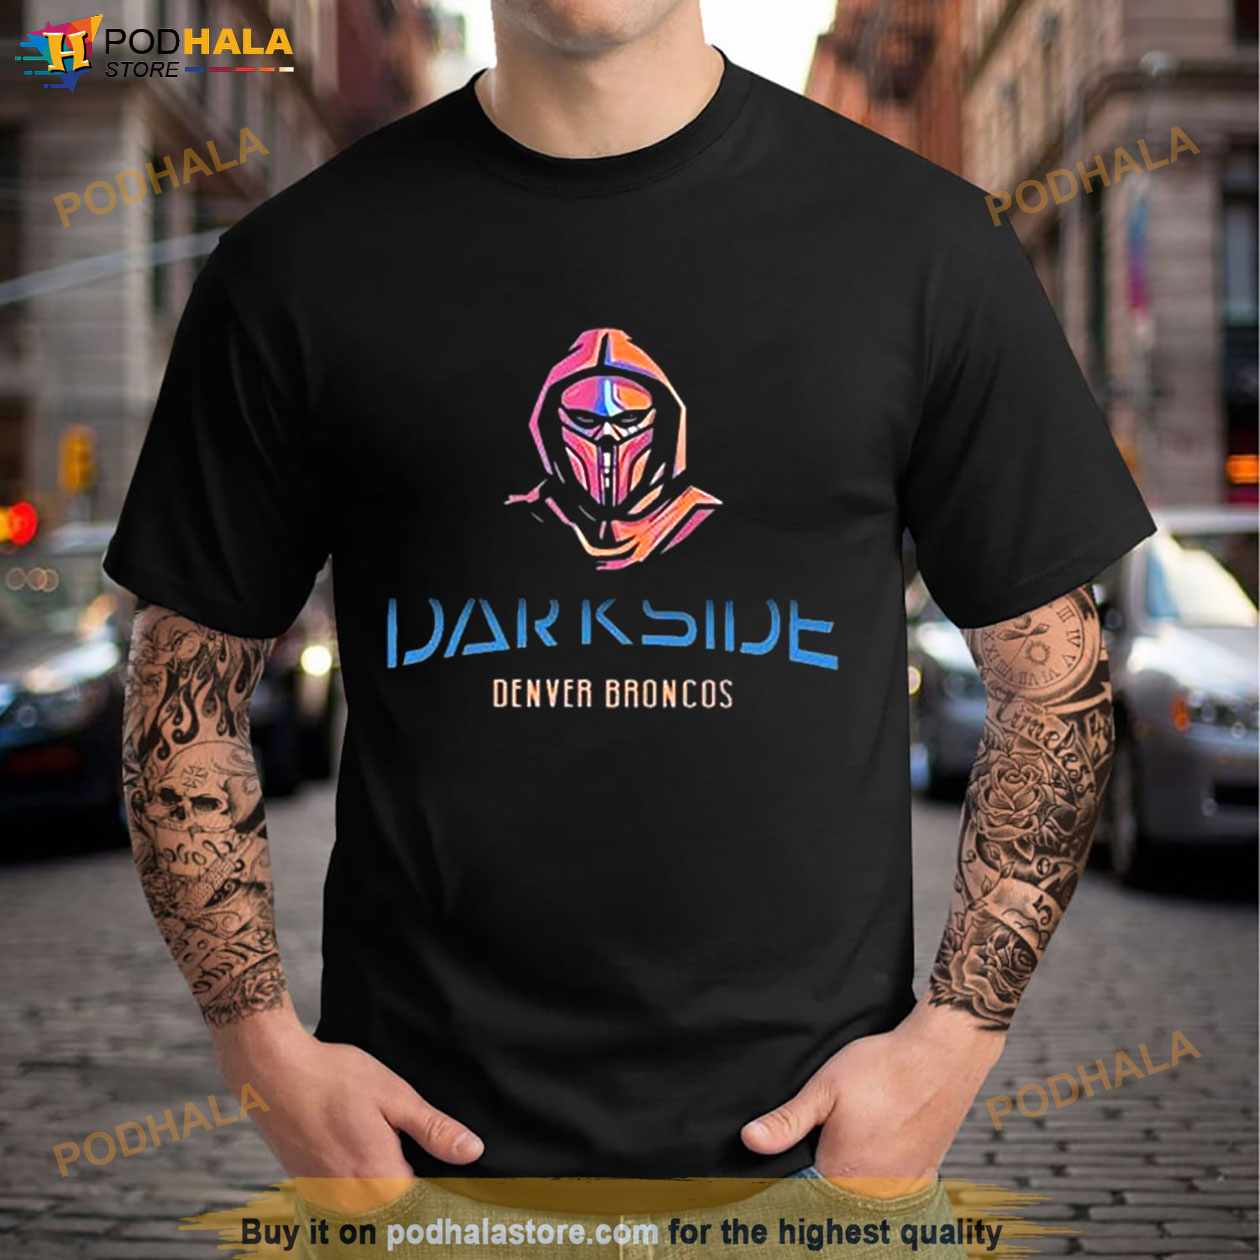 Darkside Denver Broncos Shirt - Bring Your Ideas, Thoughts And